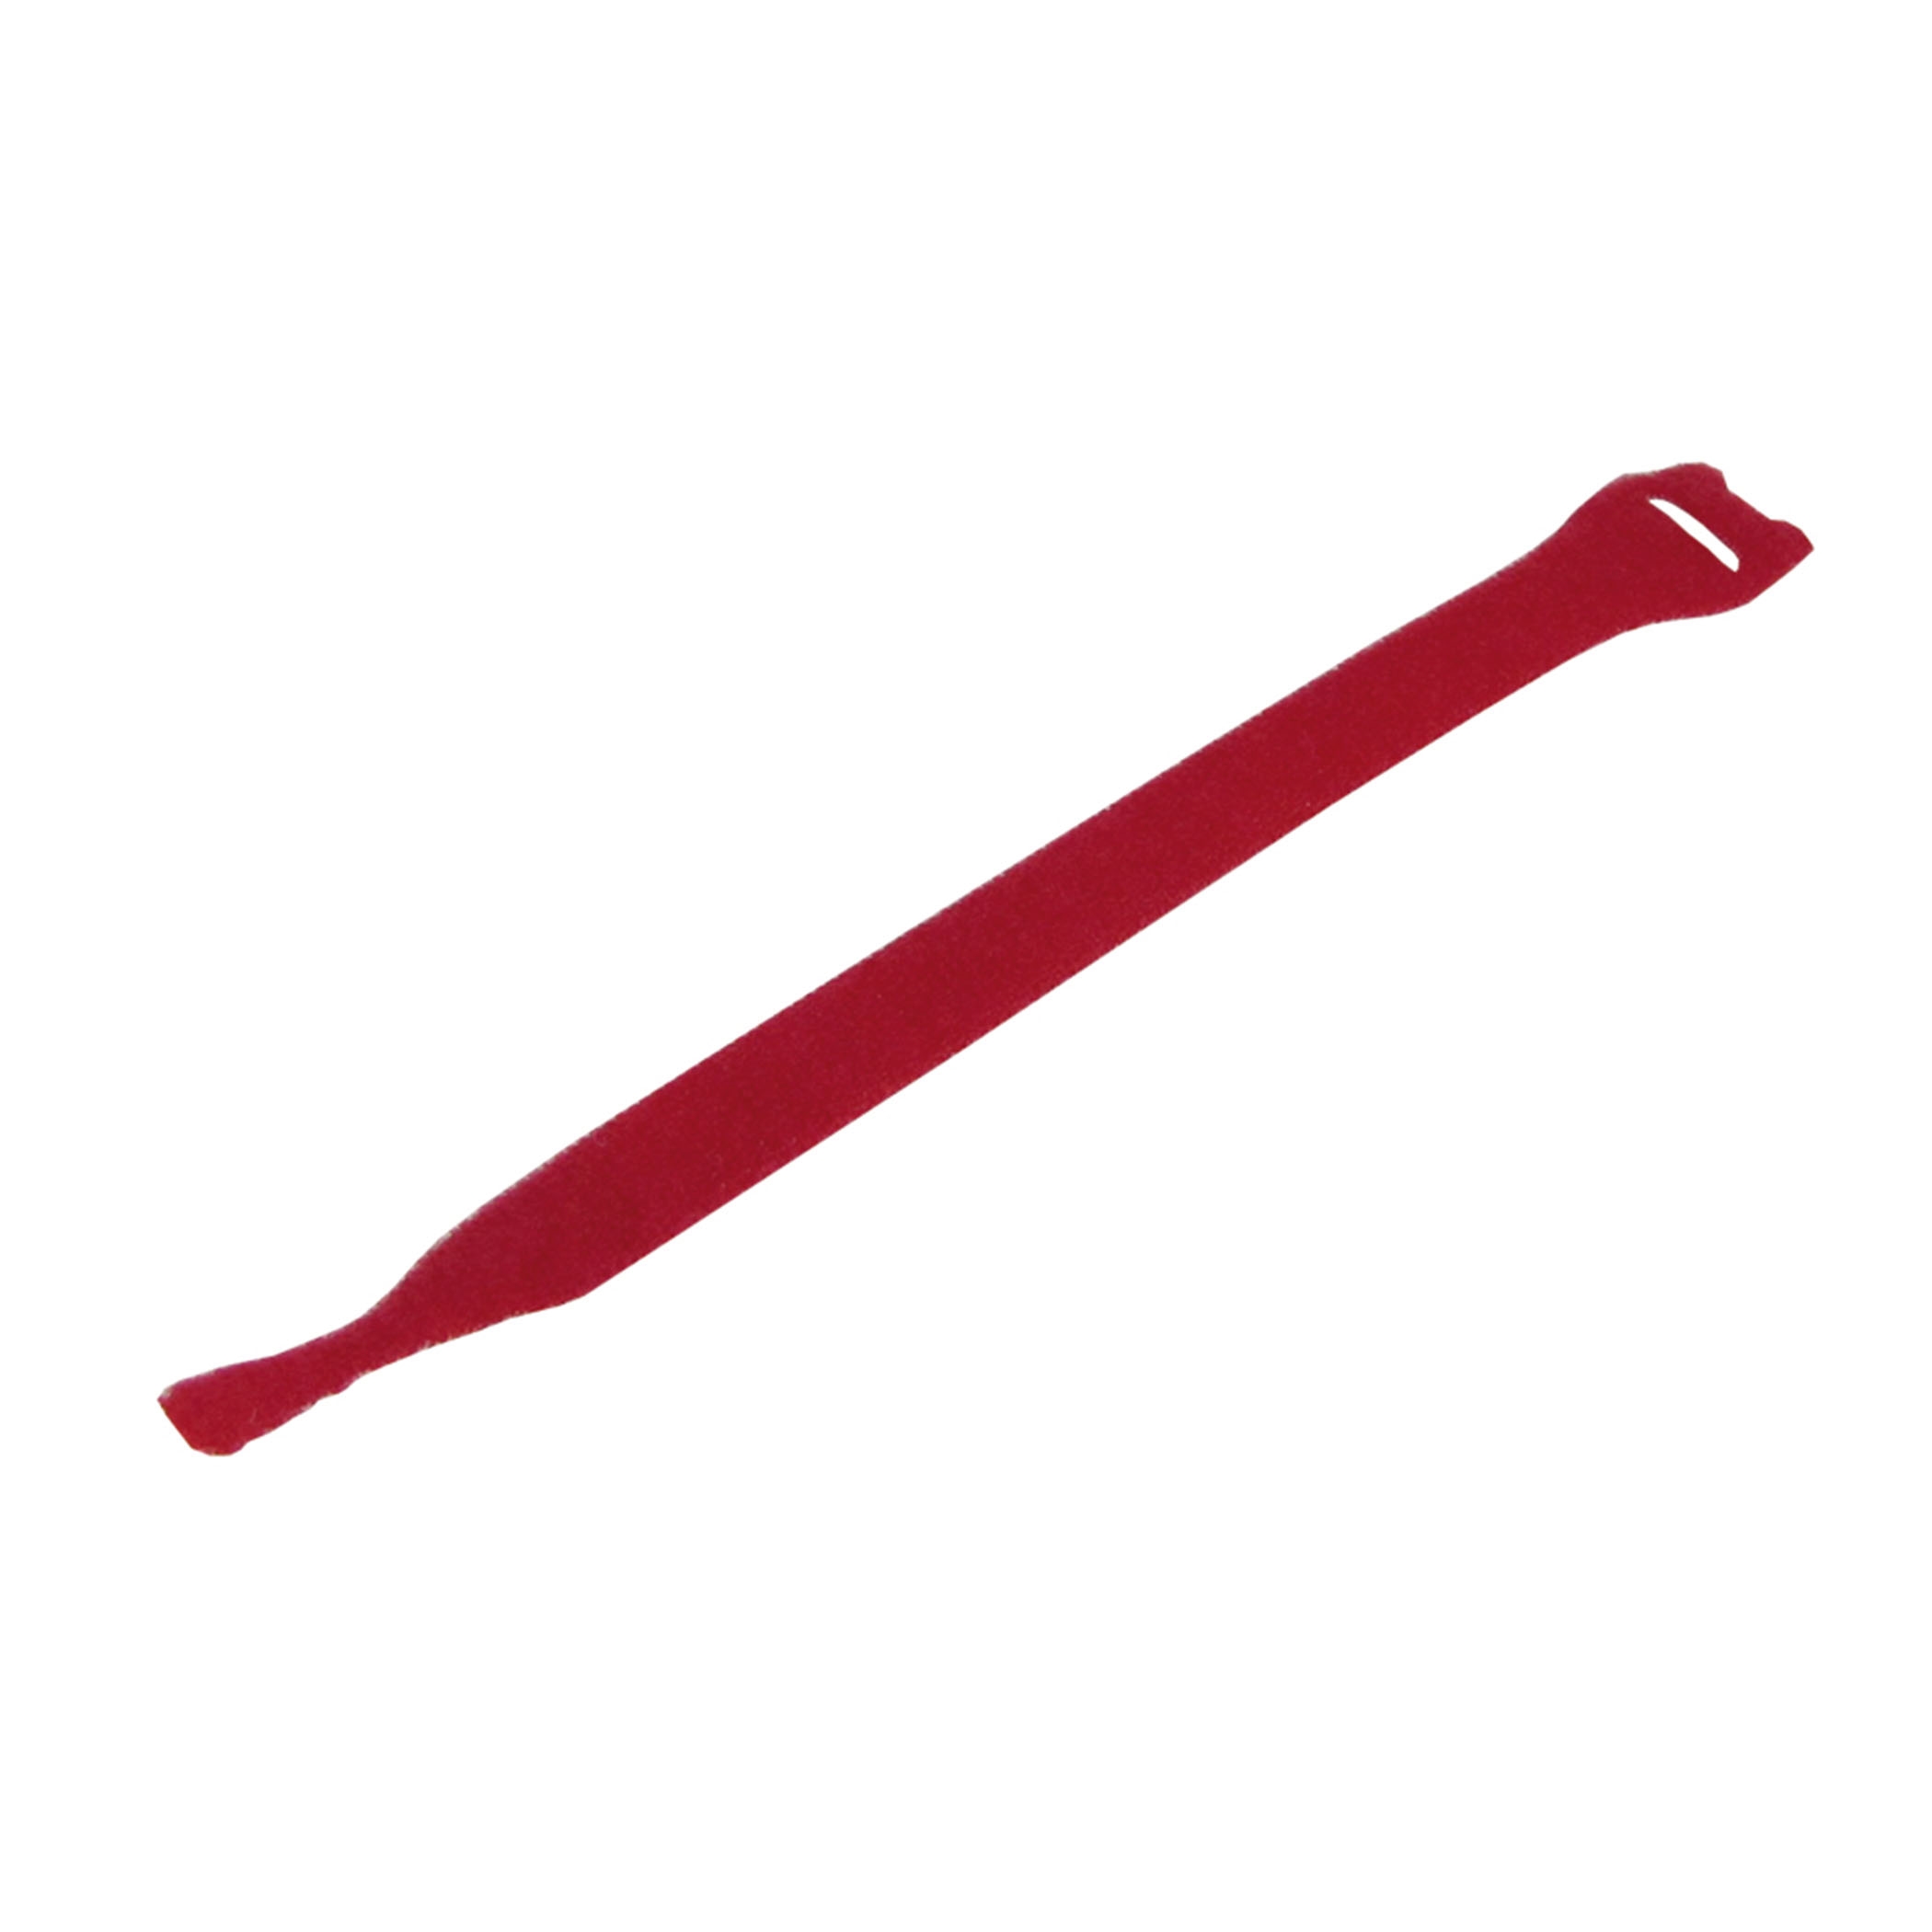 Cable Tie Red - t1513-200rh